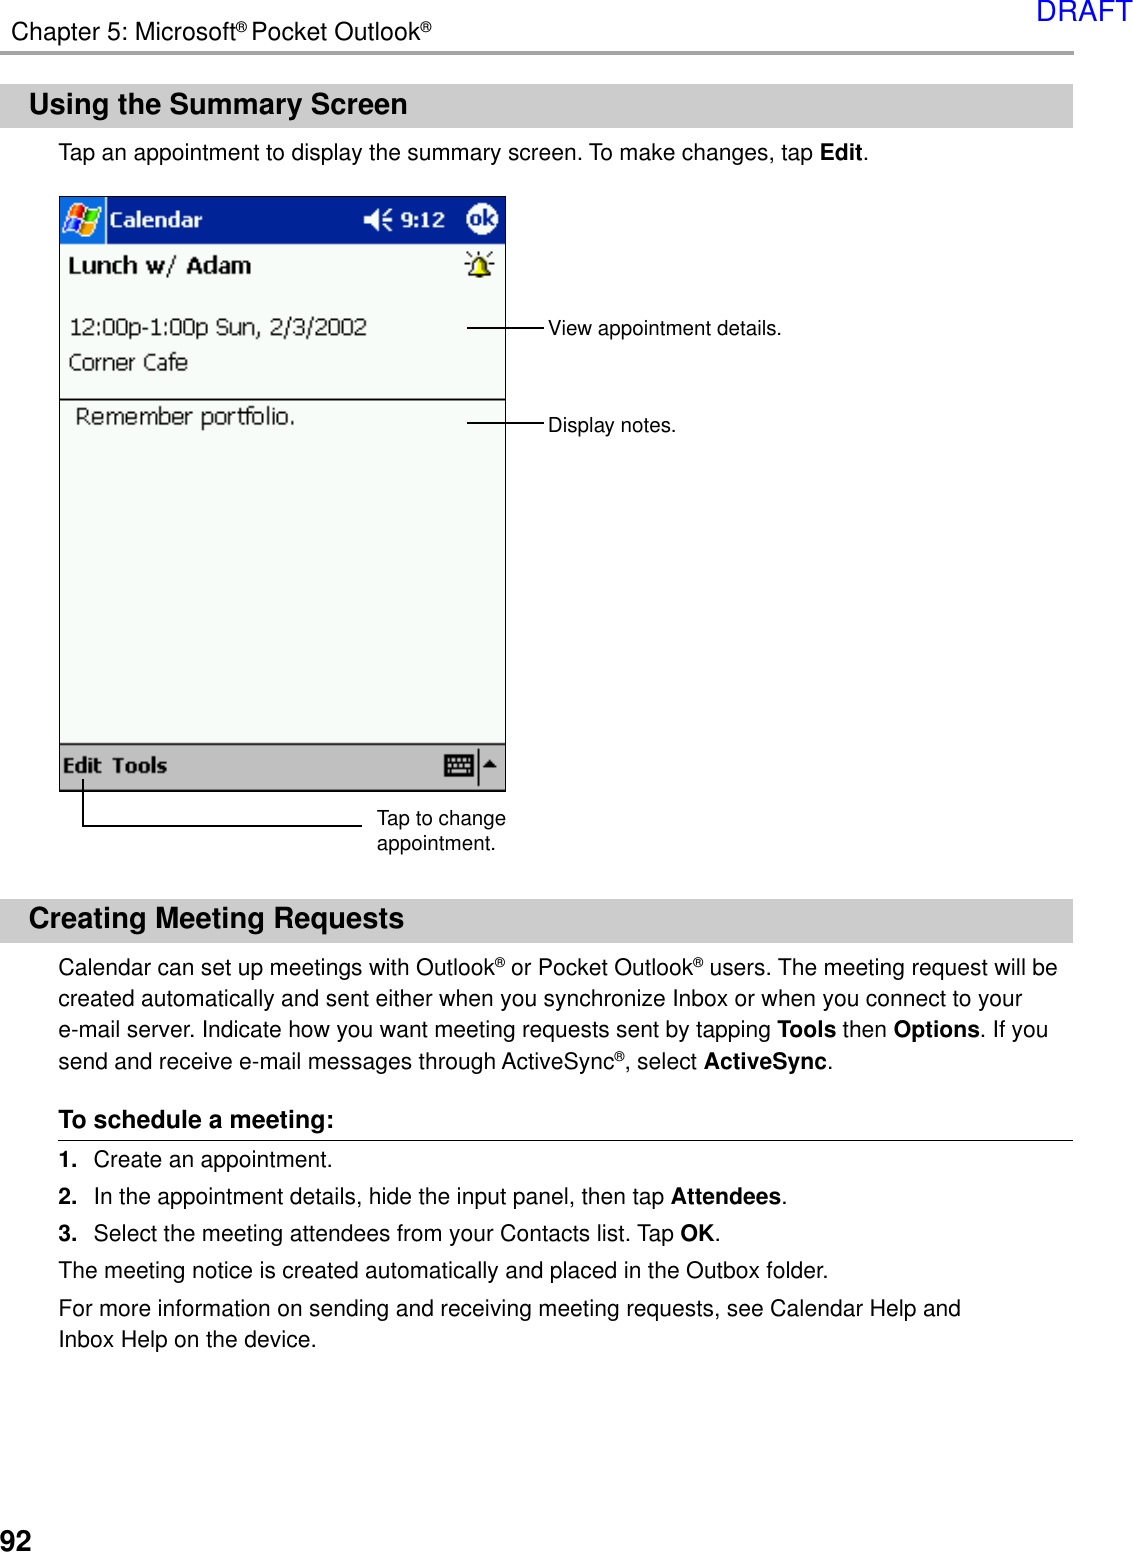 92Chapter 5: Microsoft® Pocket Outlook®Using the Summary ScreenTap an appointment to display the summary screen. To make changes, tap Edit.Creating Meeting RequestsCalendar can set up meetings with Outlook® or Pocket Outlook® users. The meeting request will becreated automatically and sent either when you synchronize Inbox or when you connect to youre-mail server. Indicate how you want meeting requests sent by tapping Tools then Options. If yousend and receive e-mail messages through ActiveSync®, select ActiveSync.To schedule a meeting:1. Create an appointment.2. In the appointment details, hide the input panel, then tap Attendees.3. Select the meeting attendees from your Contacts list. Tap OK.The meeting notice is created automatically and placed in the Outbox folder.For more information on sending and receiving meeting requests, see Calendar Help andInbox Help on the device.View appointment details.  Display notes.Tap to changeappointment.DRAFT